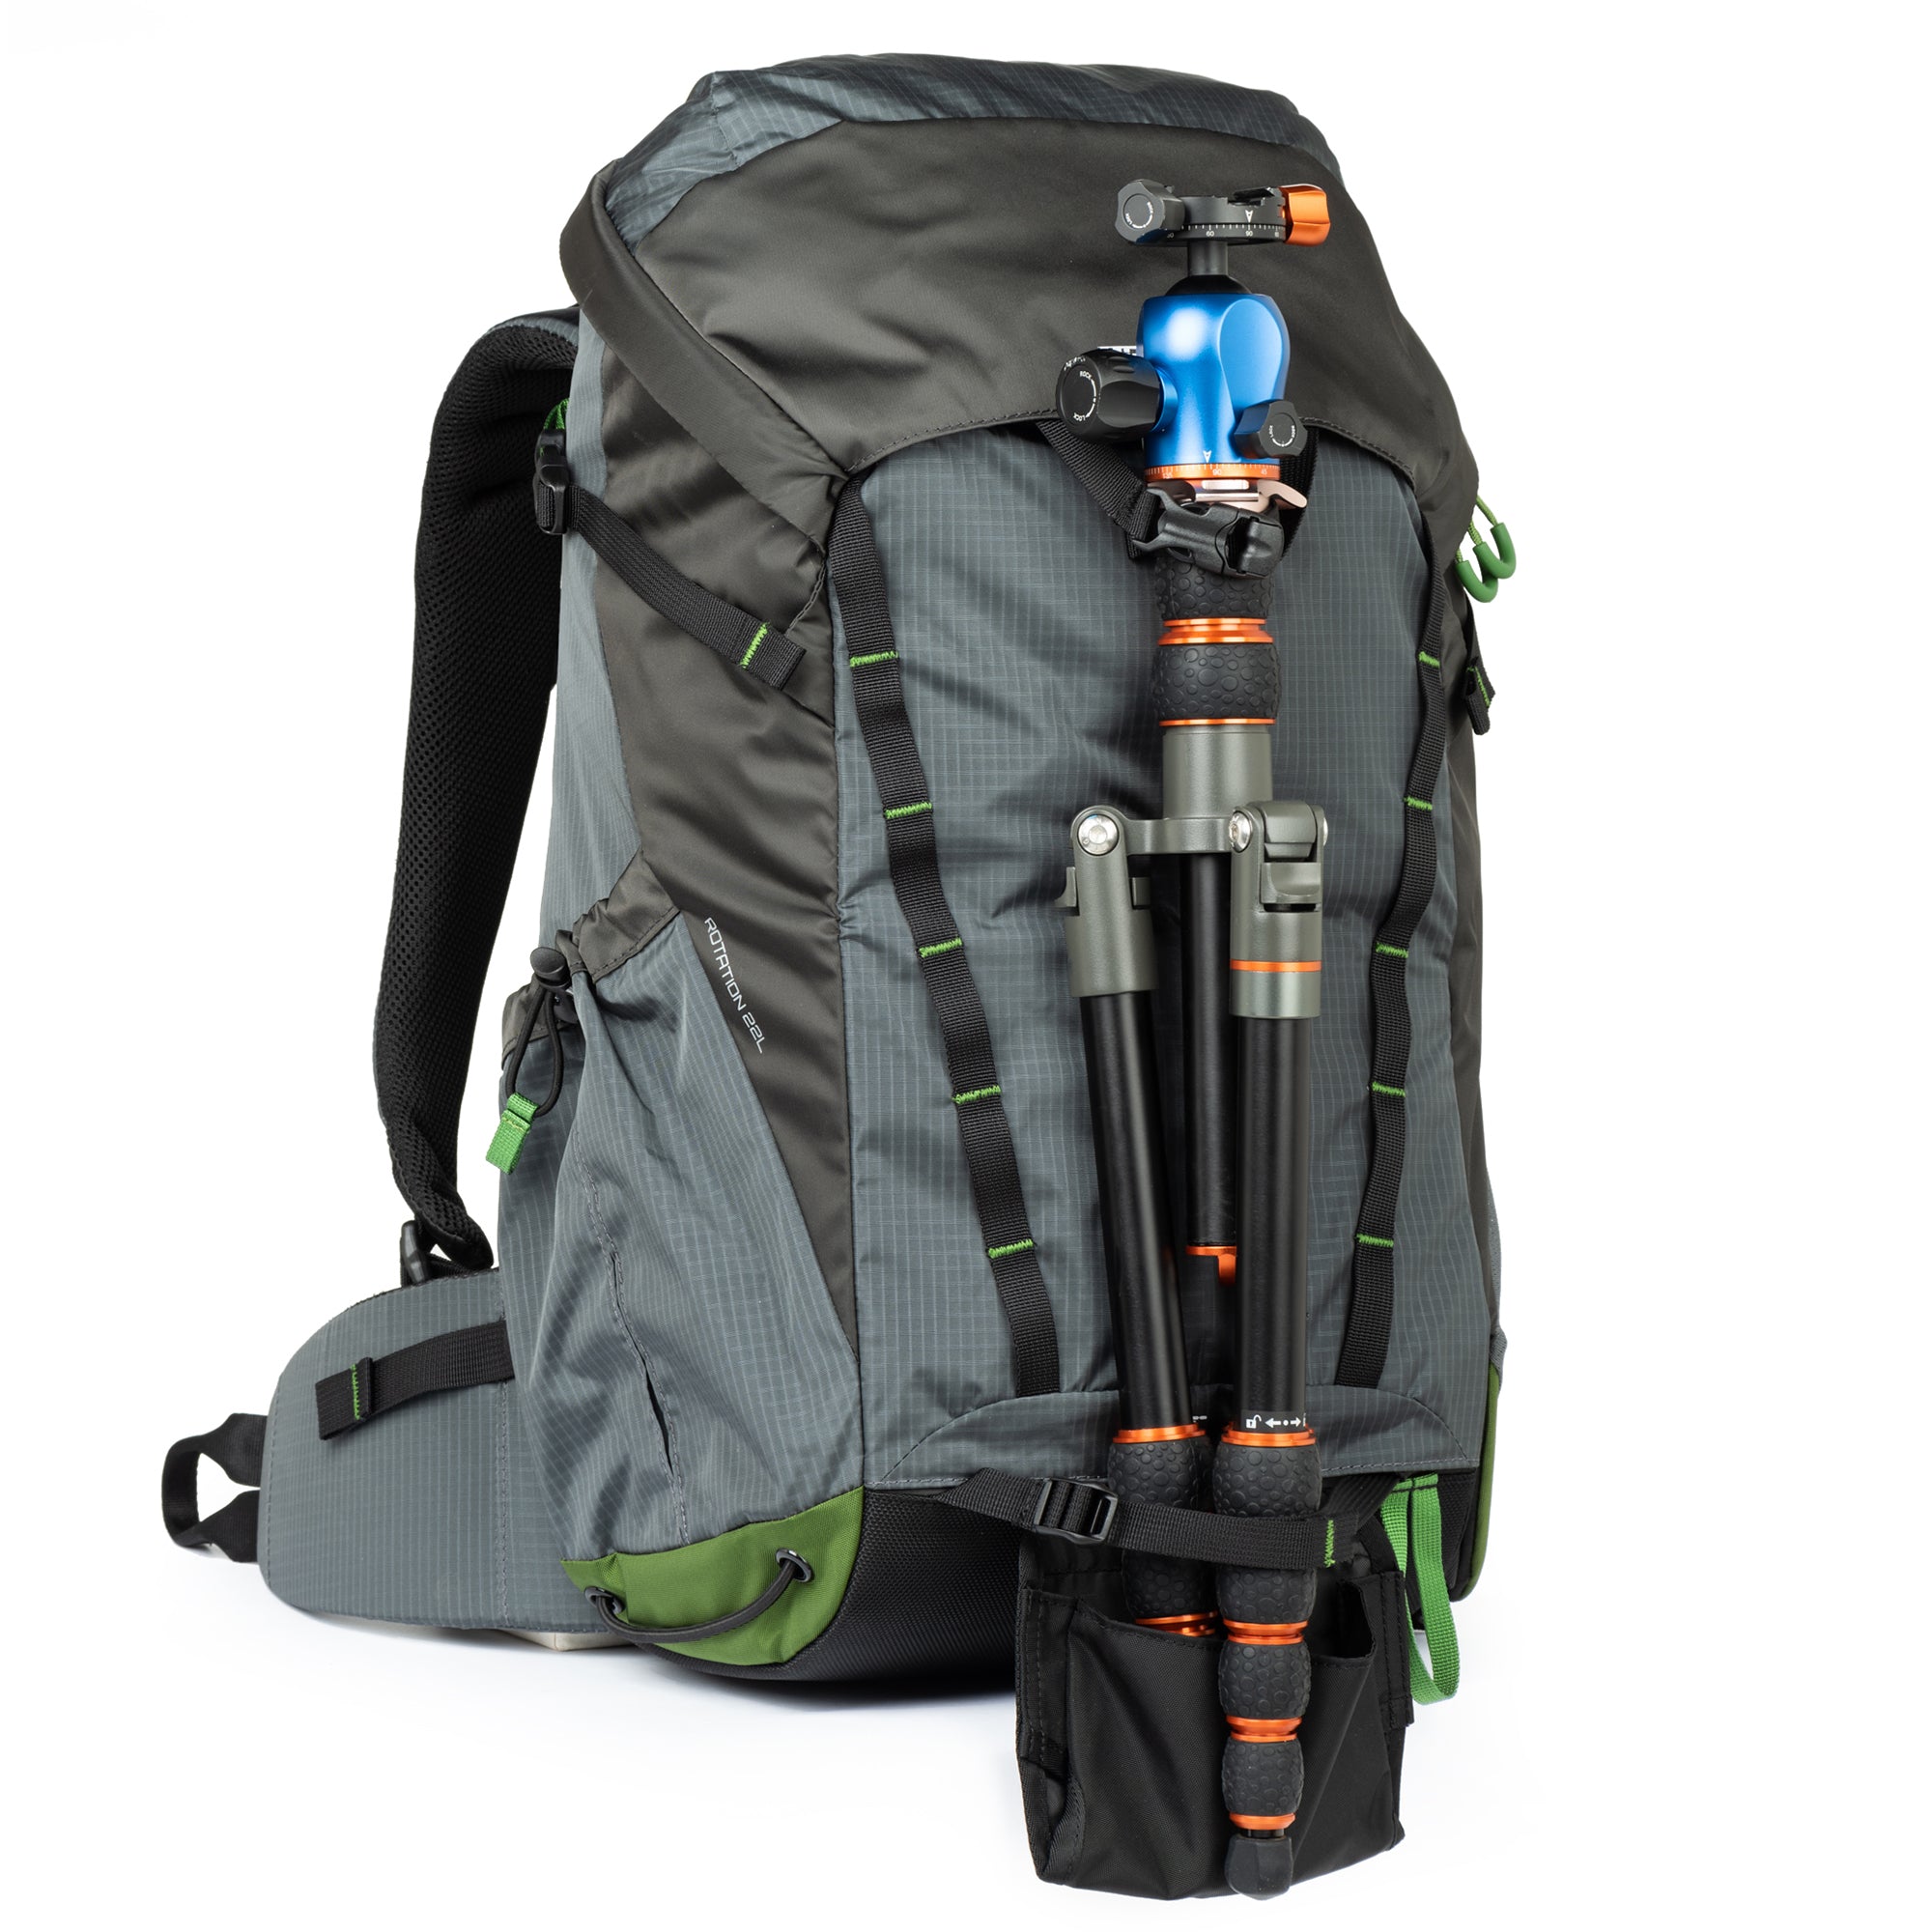 MindShift Gear Rotation 180 22L Photo Backpack, Color Green, Size Medium: Up to 1 2 Bodies/2 4 Lenses/Acc, 20x12x8